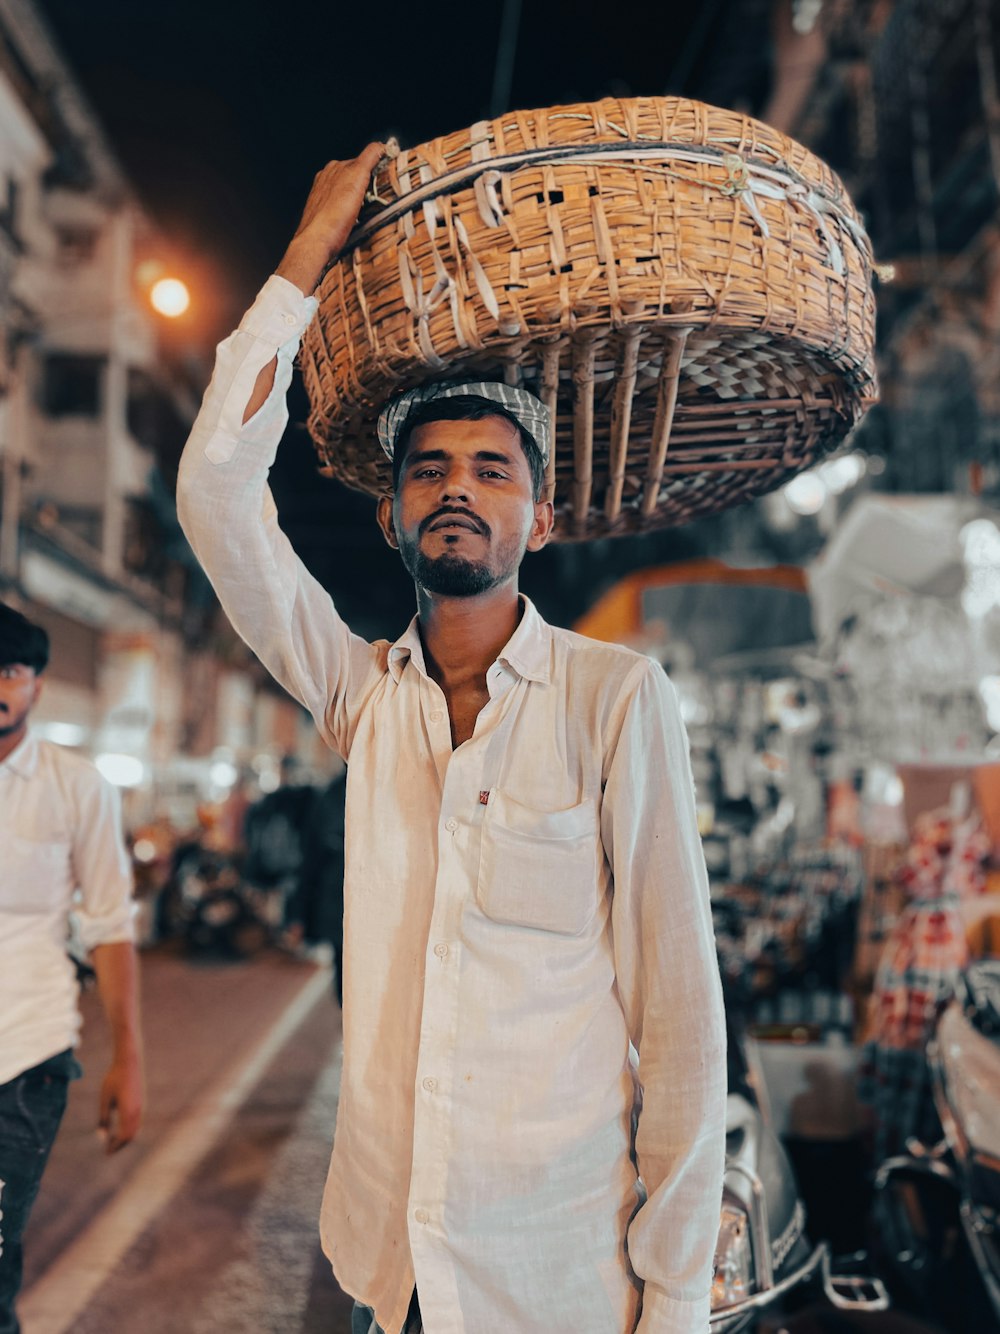 a man carrying a basket on his head